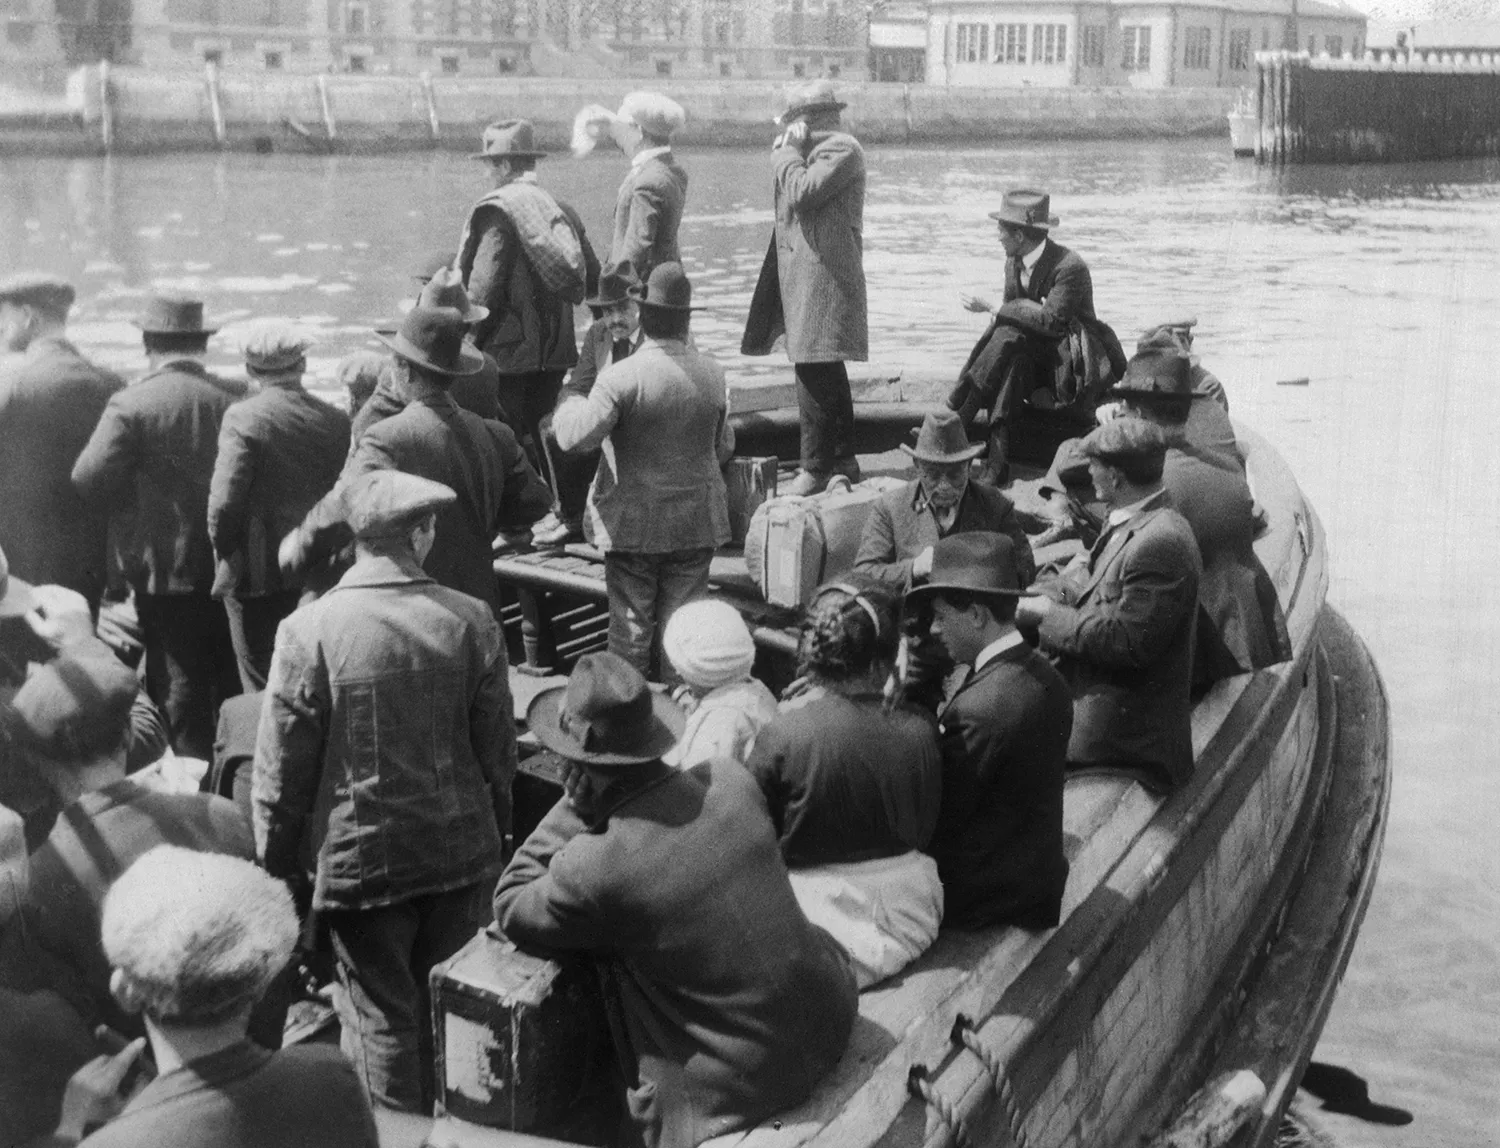 This black-and-white historical photo from the 1920s shows the deck of a small boat crowded with people as it floats on a river.